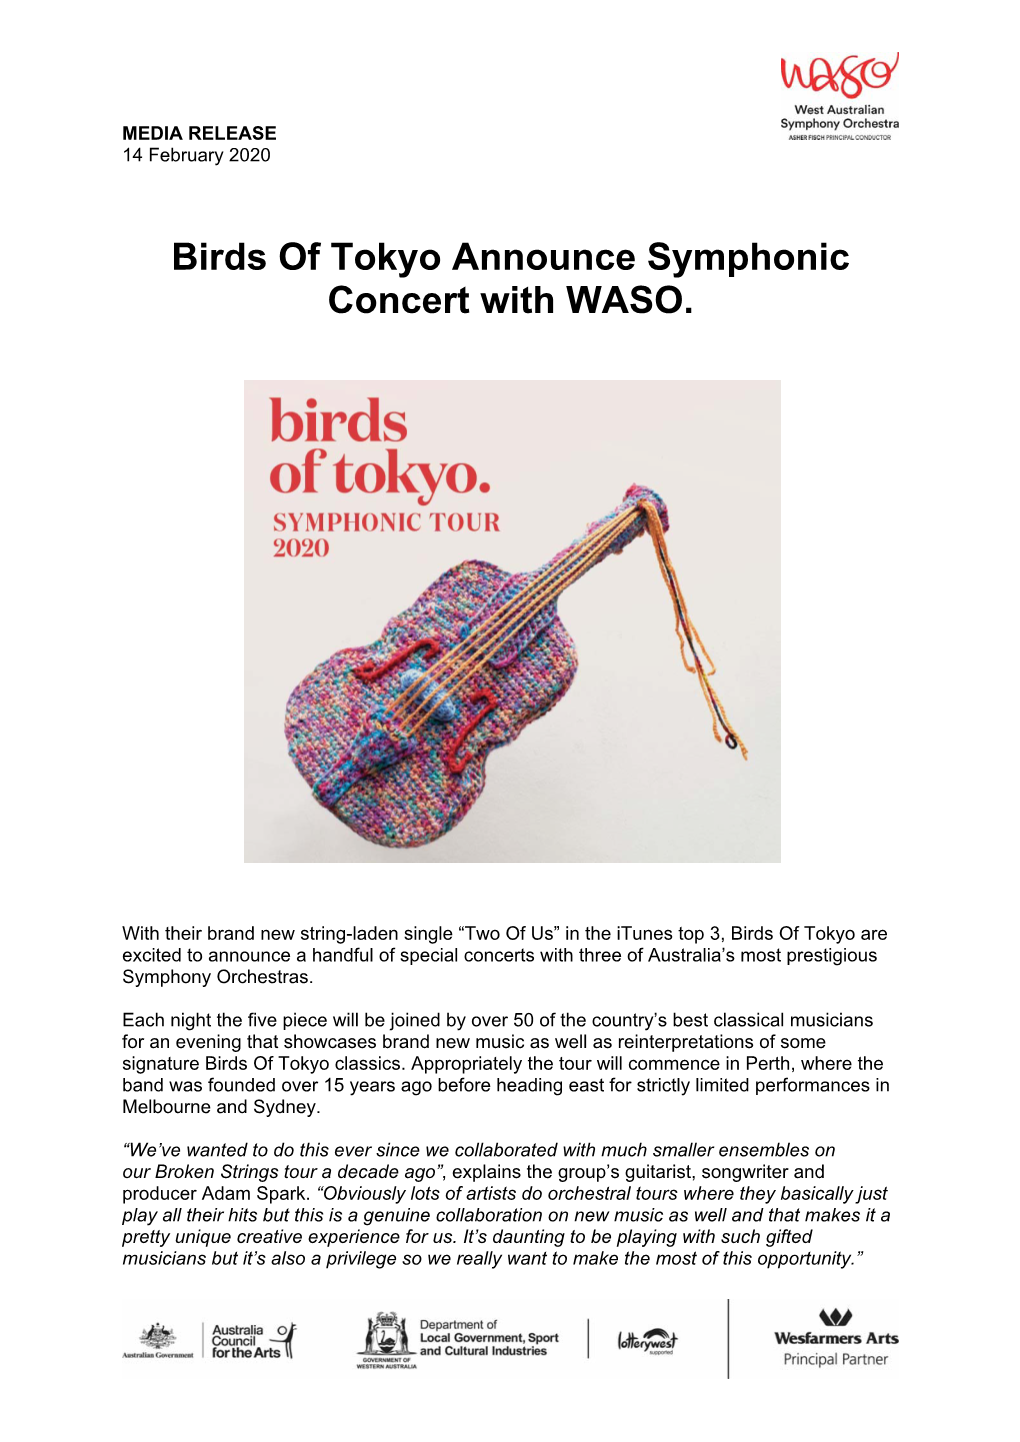 Birds of Tokyo Announce Symphonic Concert with WASO